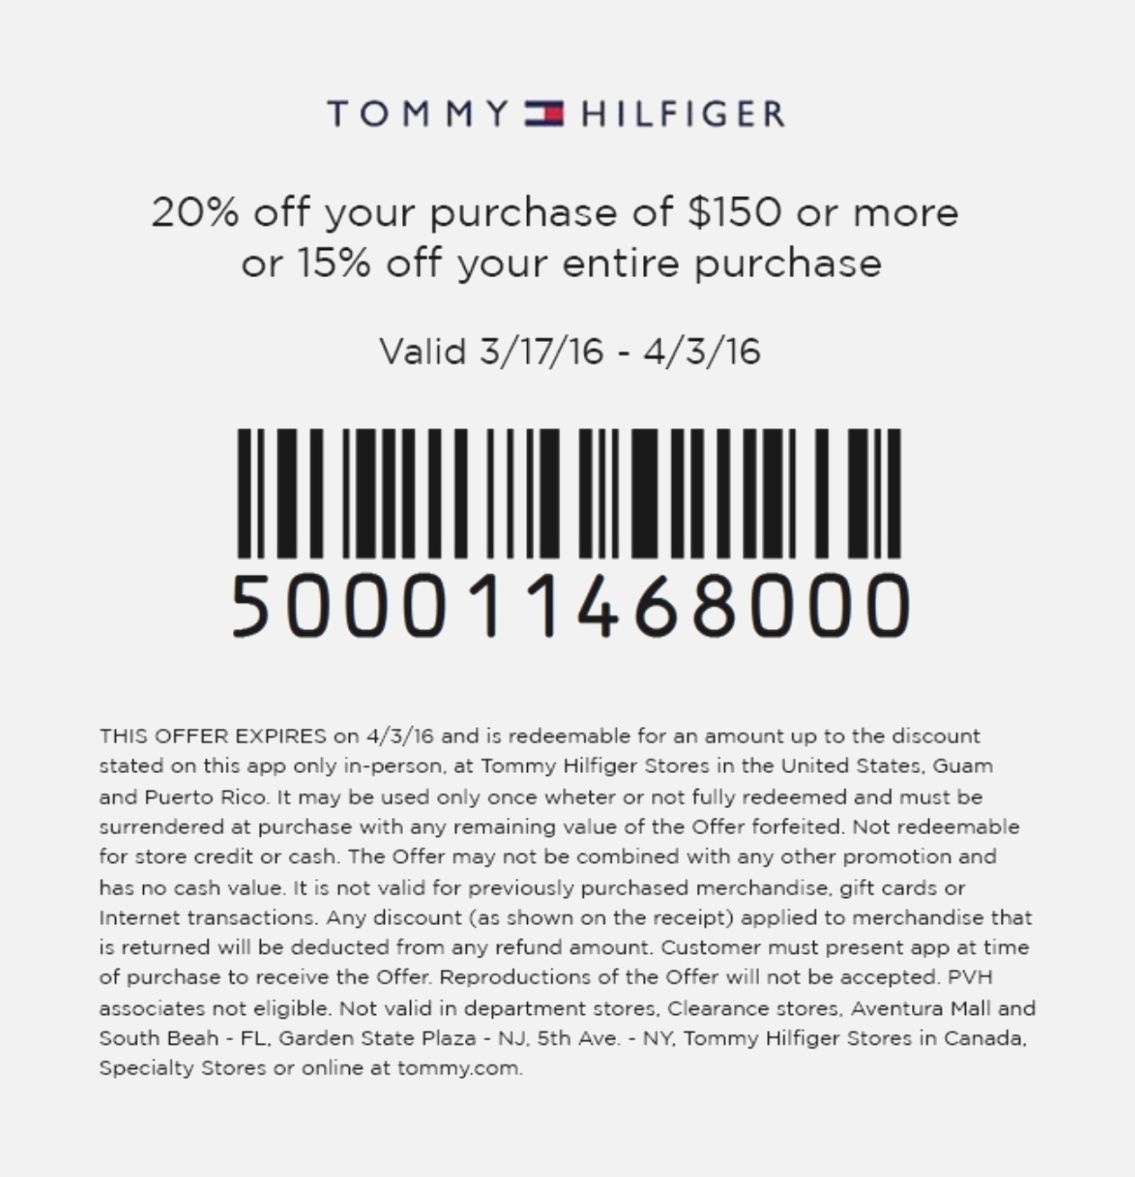 Exceptional Tommy Hilfiger Outlet Printable Coupon Jeettp Printable